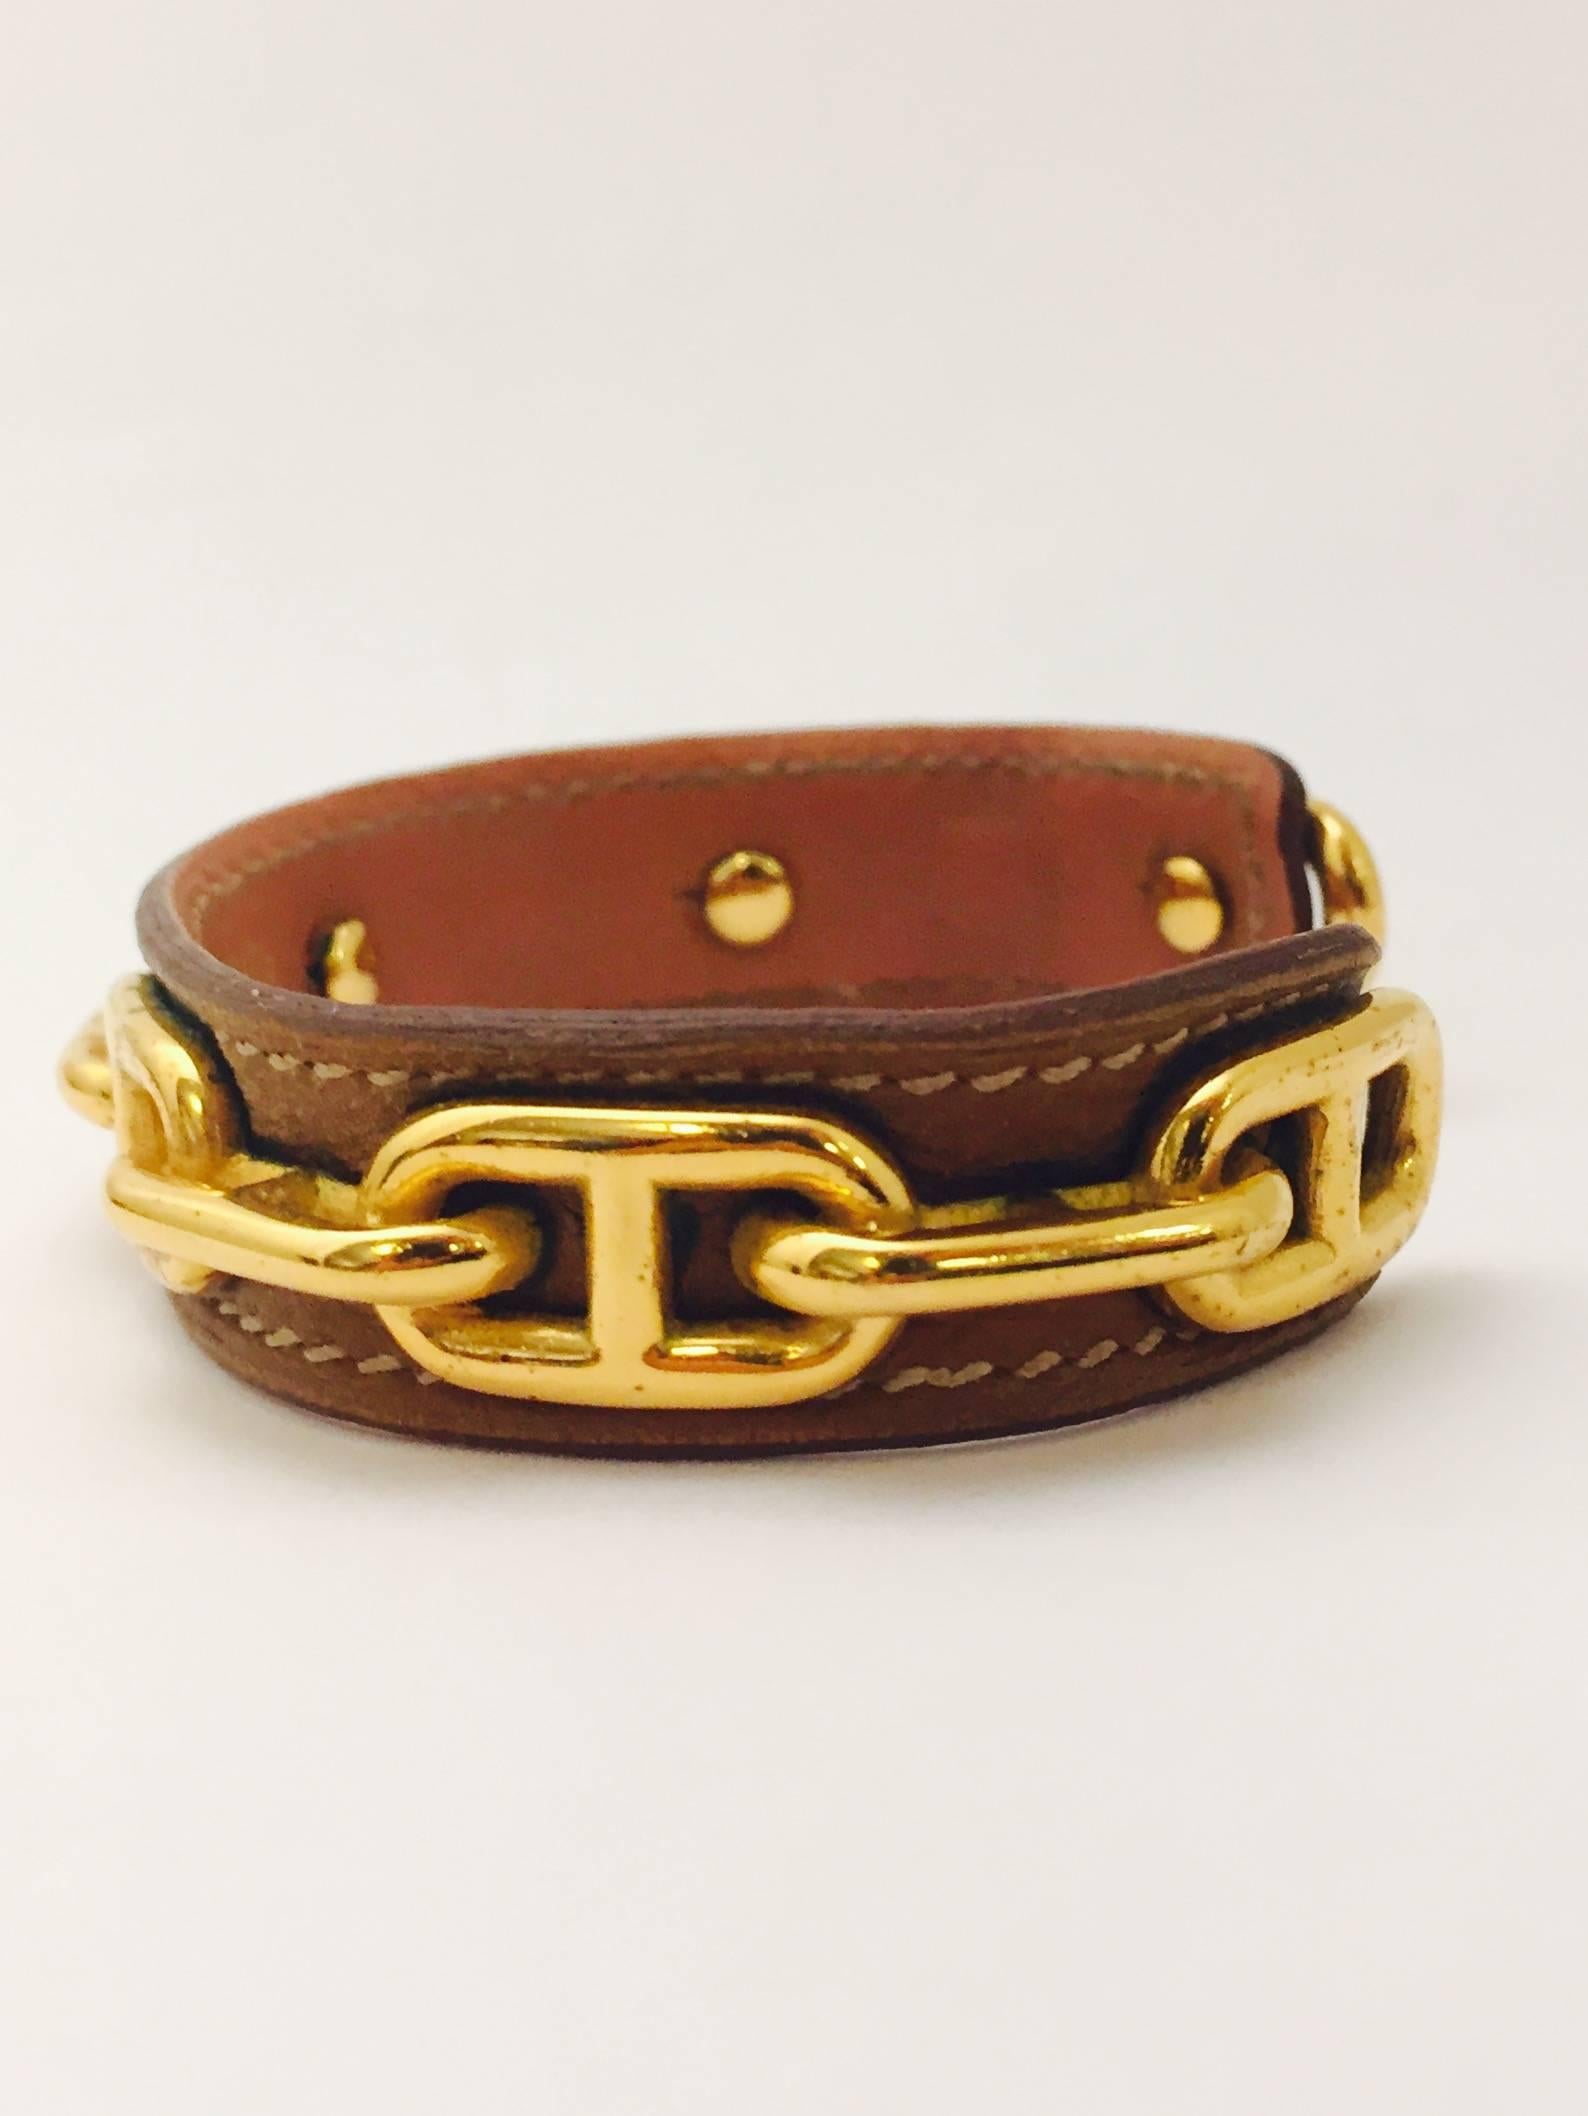 Hermes leather bracelet with Chaine d'Ancre (Anchor Chain) model, gold plated chain on brown leather and one link on the chain is signed Hermes on the top.  The bangle bracelet is oval shape with a 1